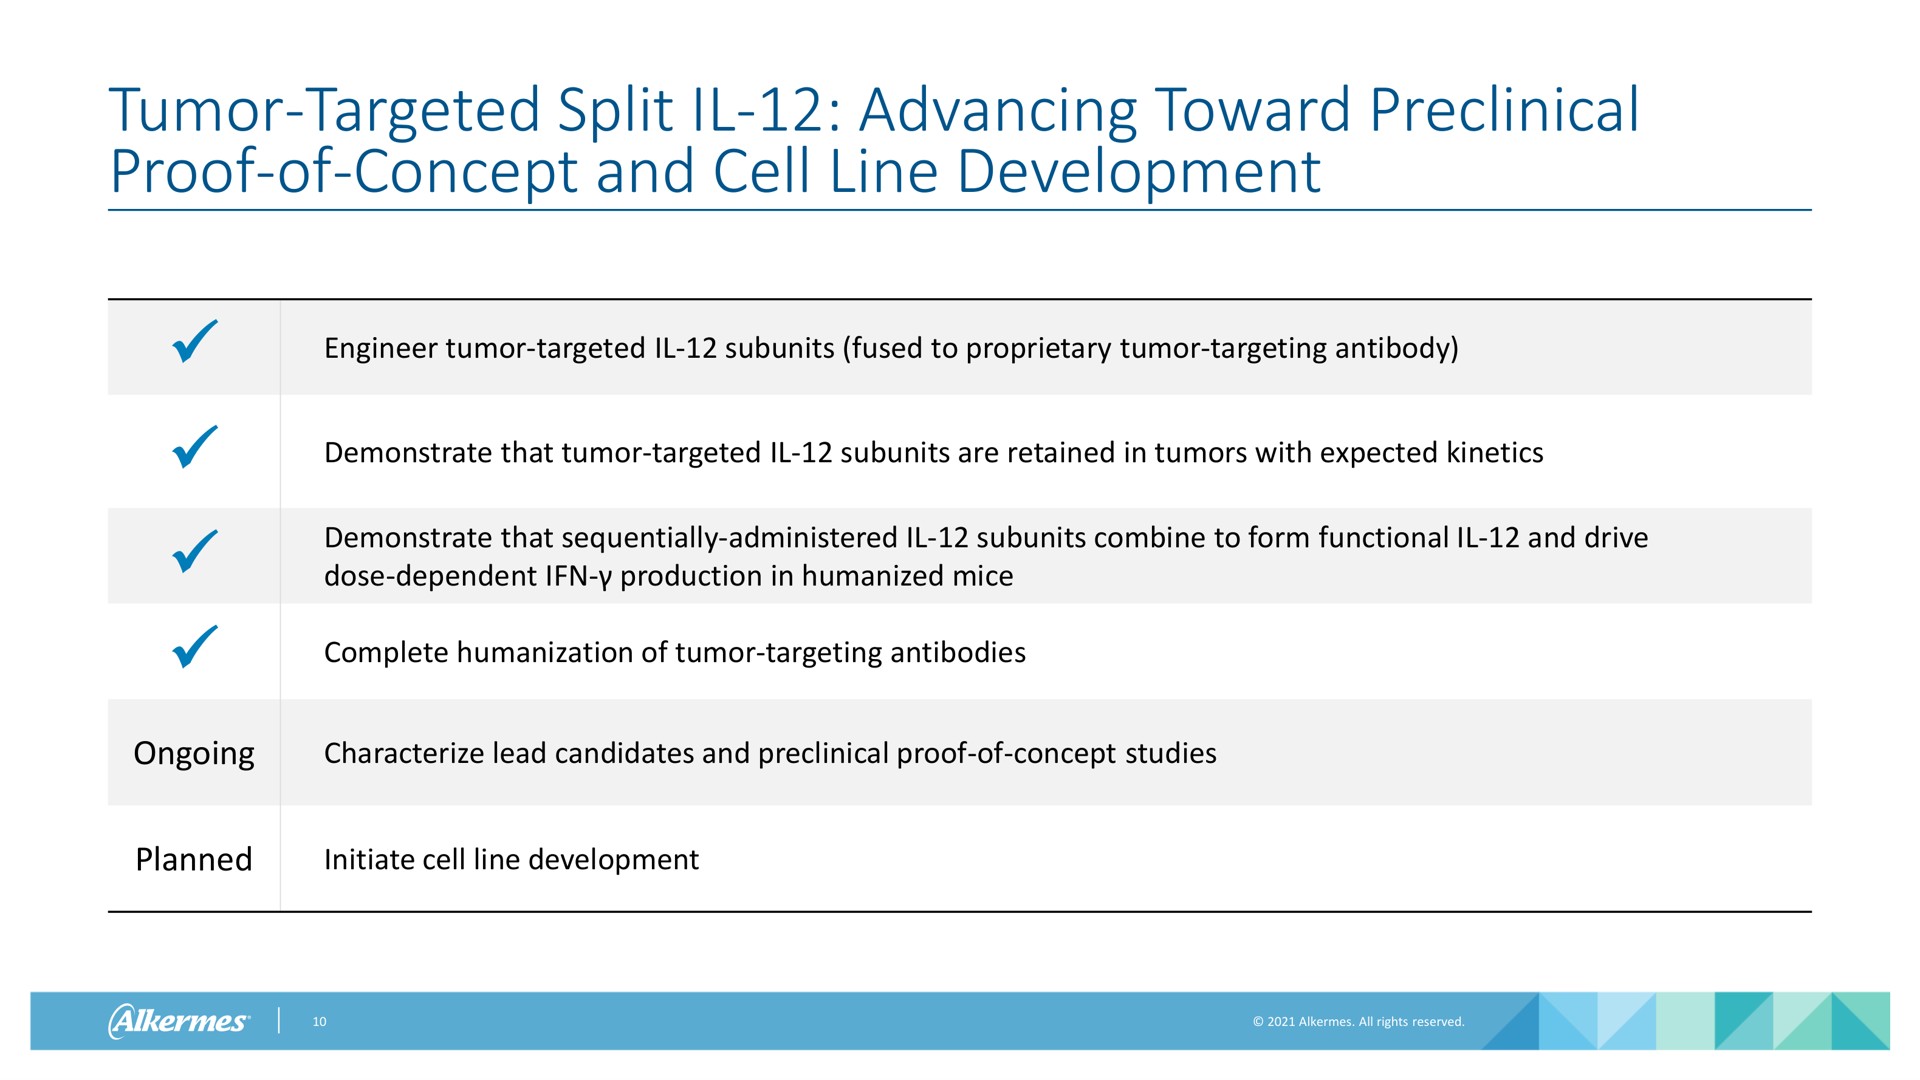 tumor targeted split advancing toward preclinical proof of concept and cell line development engineer tumor targeted subunits fused to proprietary tumor targeting antibody demonstrate that tumor targeted subunits are retained in tumors with expected kinetics demonstrate that sequentially administered subunits combine to form functional and drive dose dependent production in humanized mice complete humanization of tumor targeting antibodies ongoing characterize lead candidates and preclinical proof of concept studies planned initiate cell line development | Alkermes